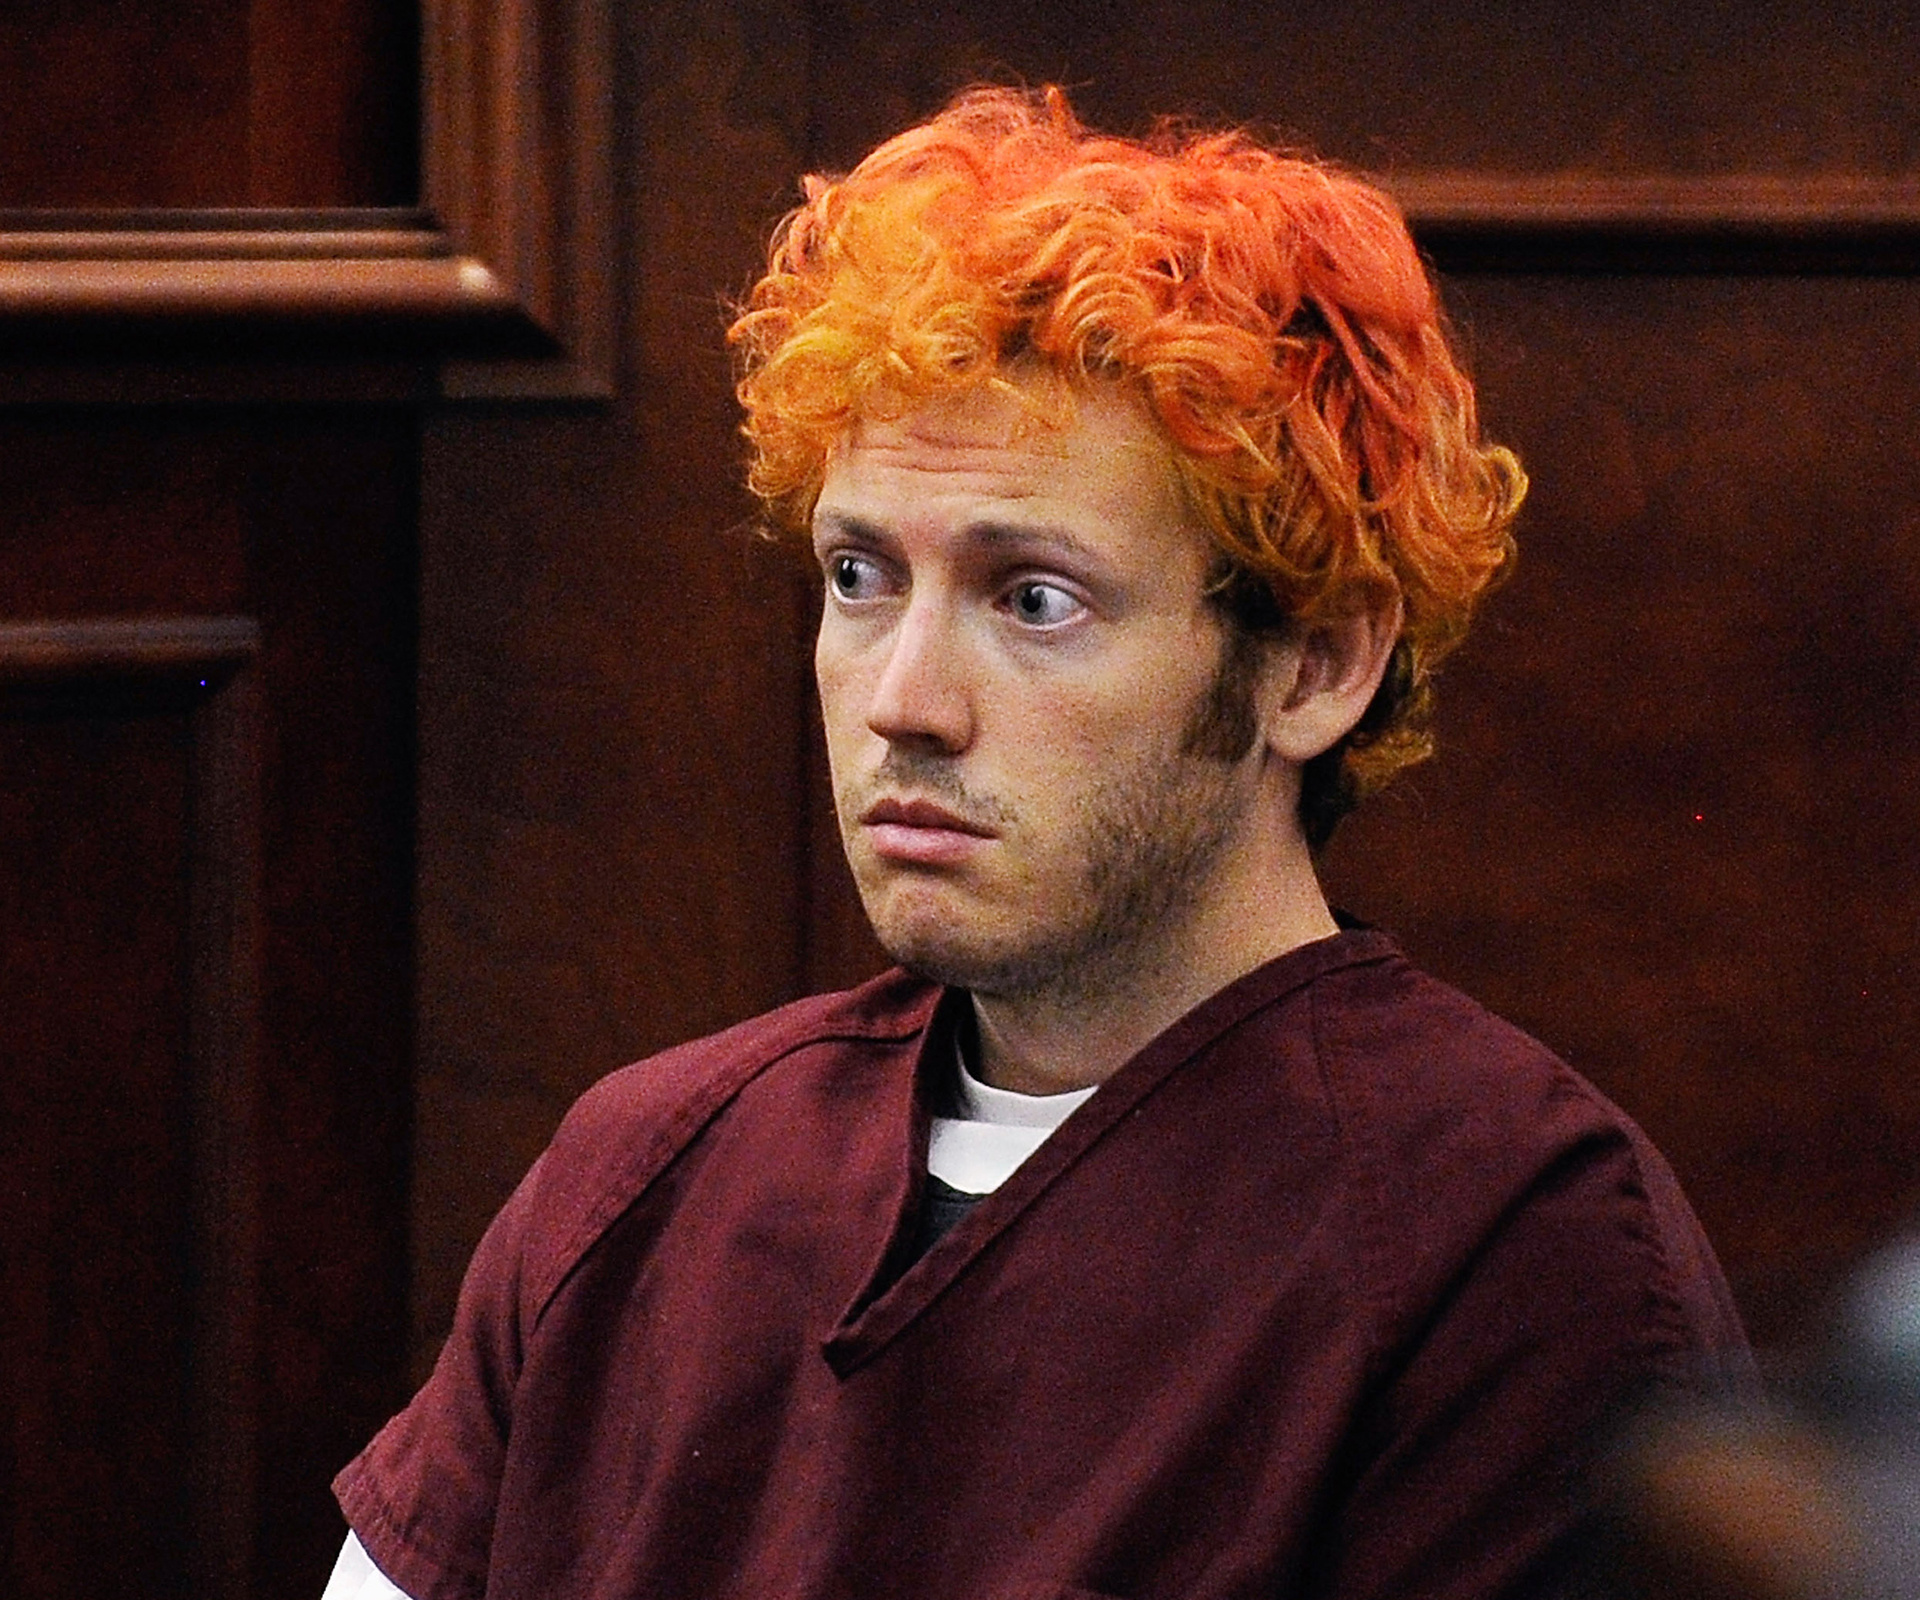 ‘Movie theatre gunman’ found guilty of 24 murder charges